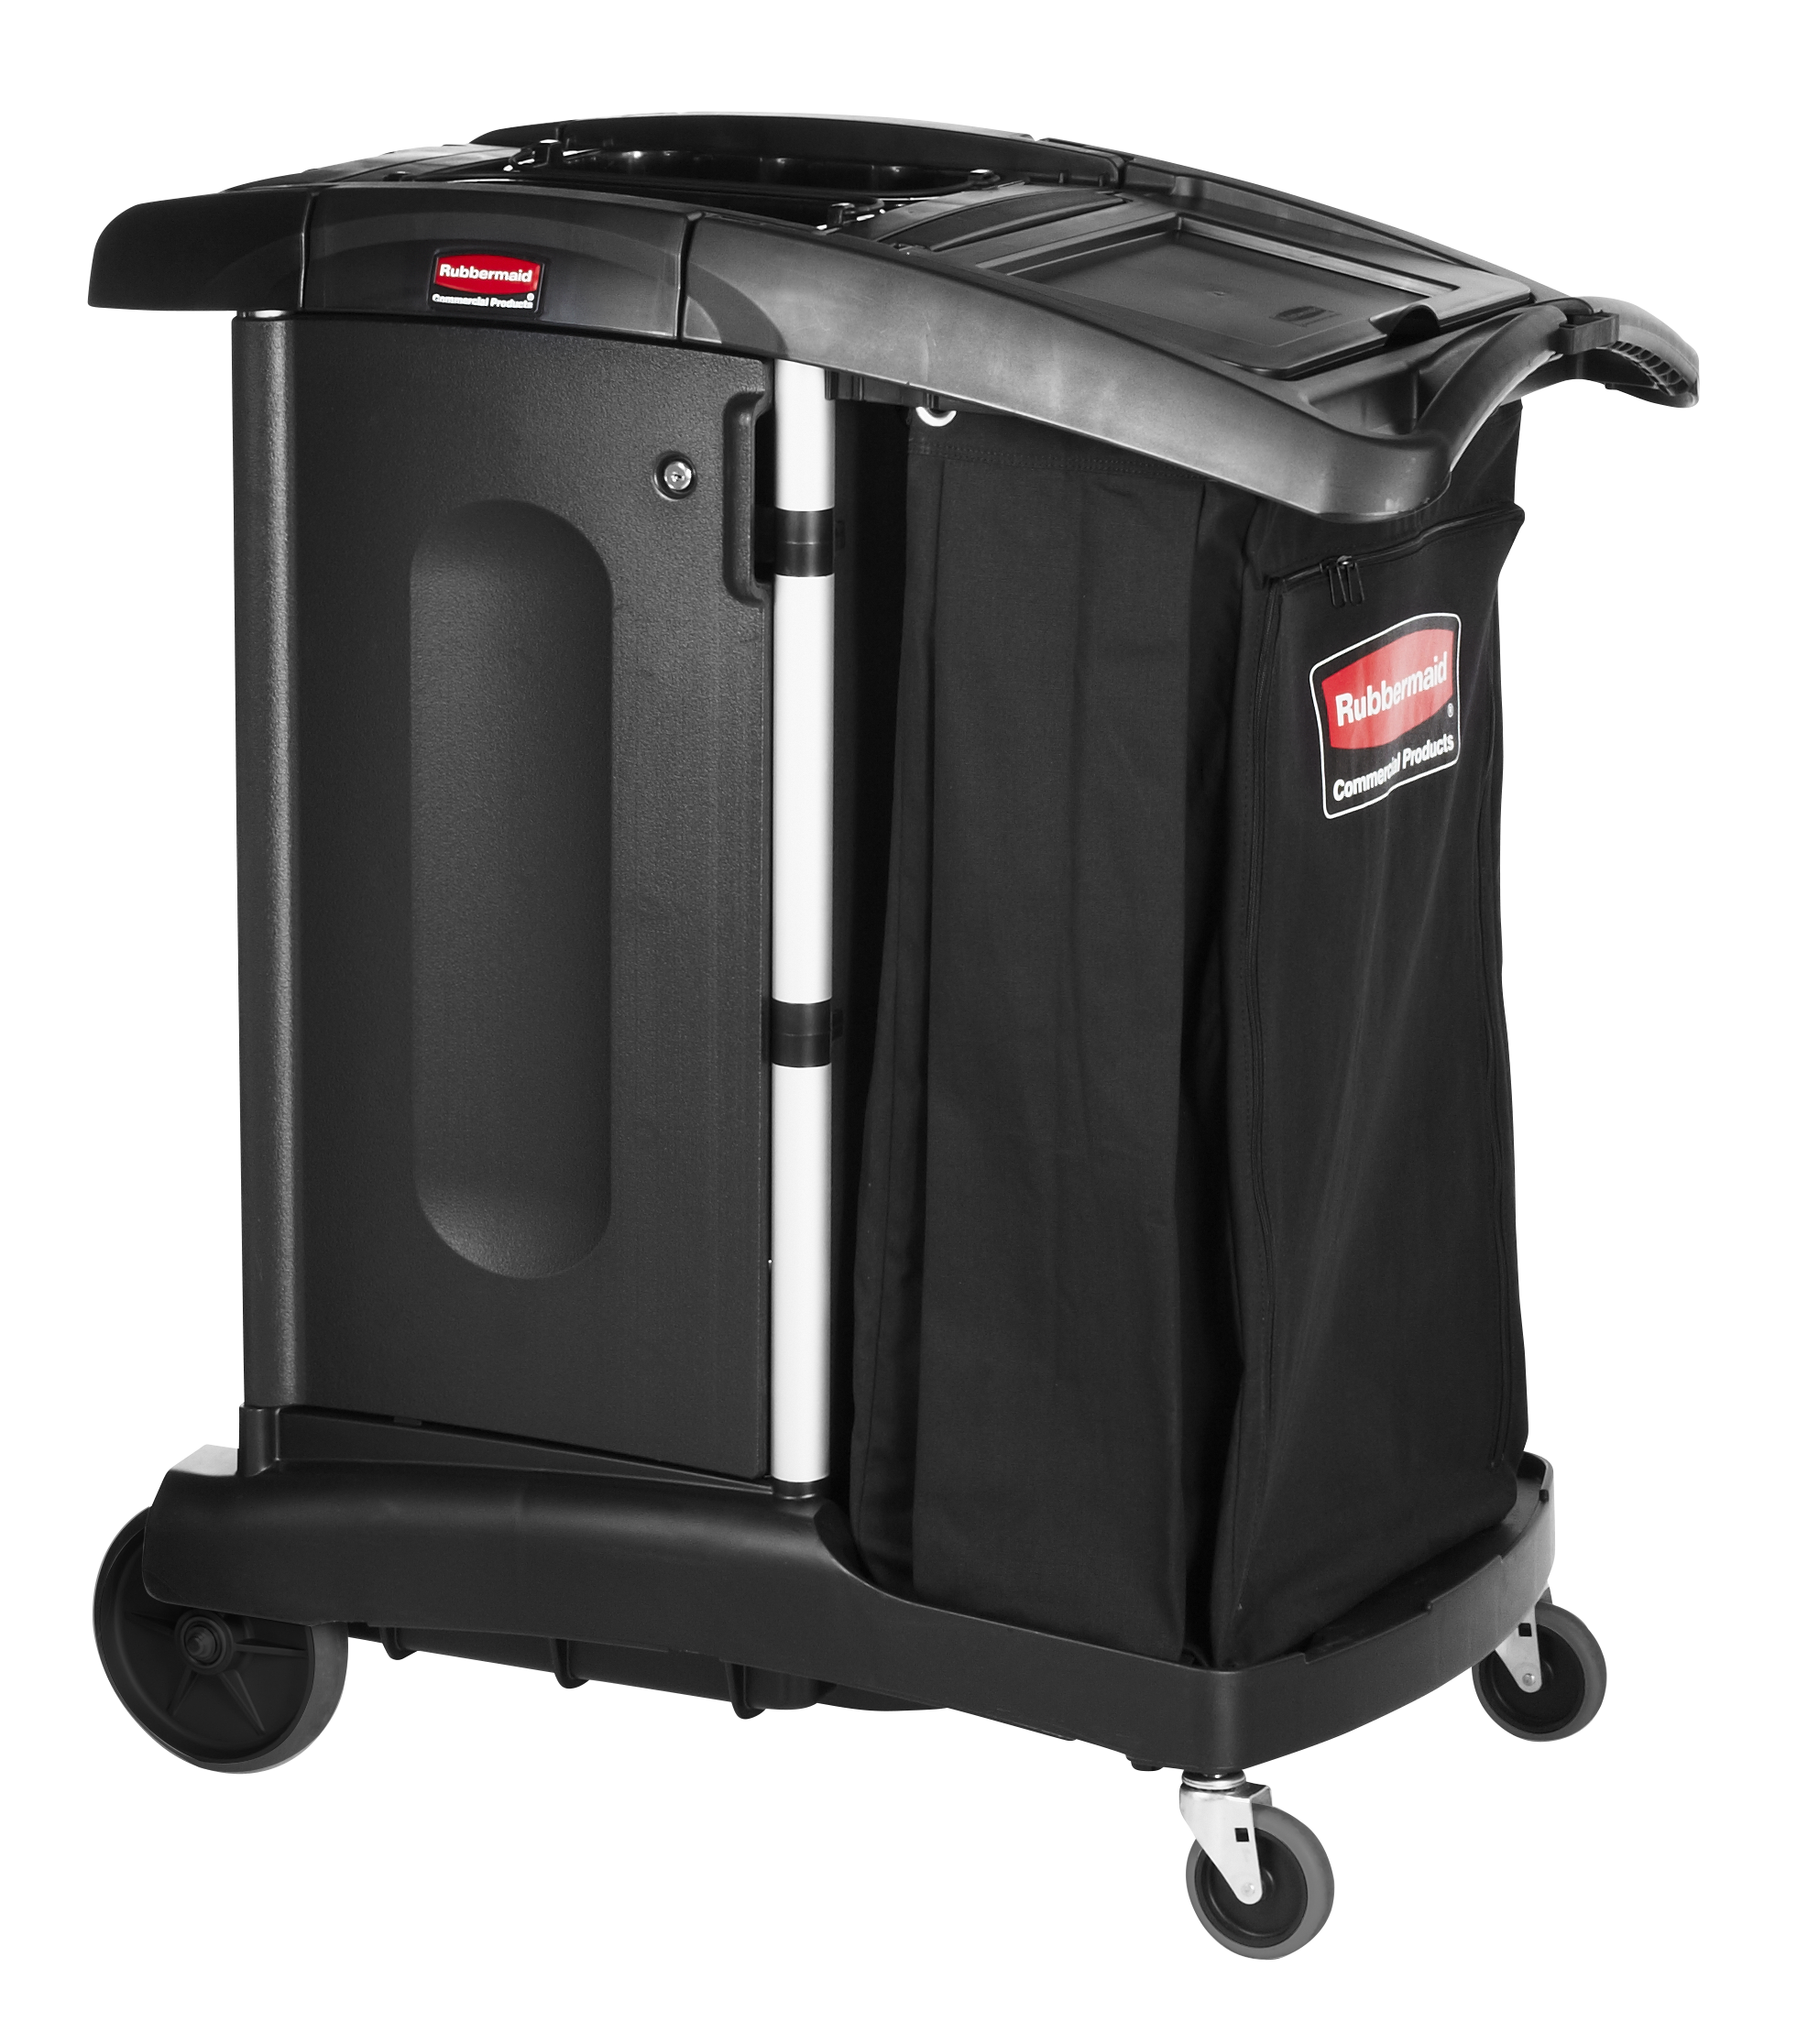 Rubbermaid Commercial Full-Size Housekeeping Cart